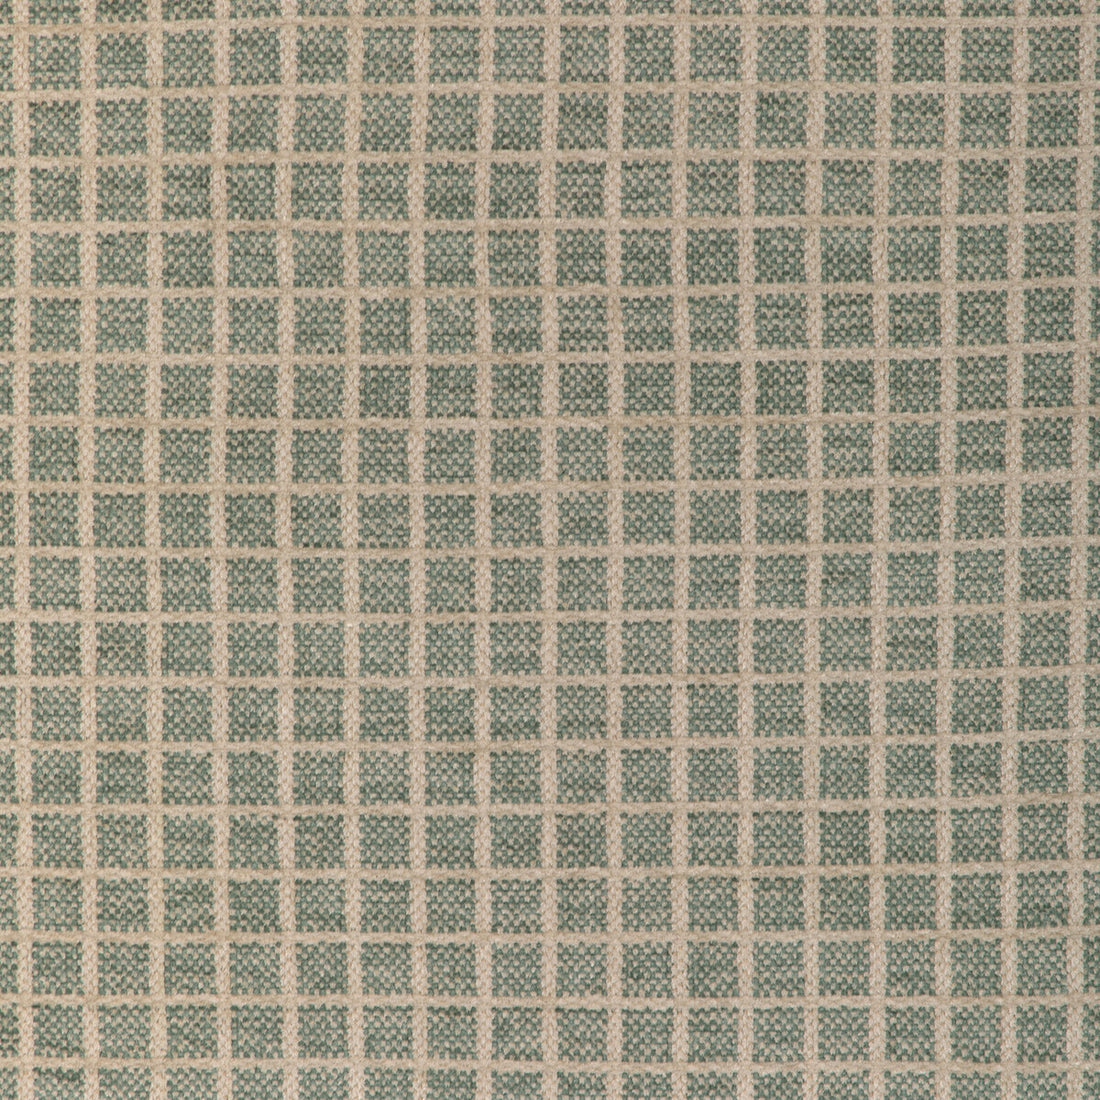 Chiron Texture fabric in lake color - pattern 8023155.13.0 - by Brunschwig &amp; Fils in the Chambery Textures IV collection